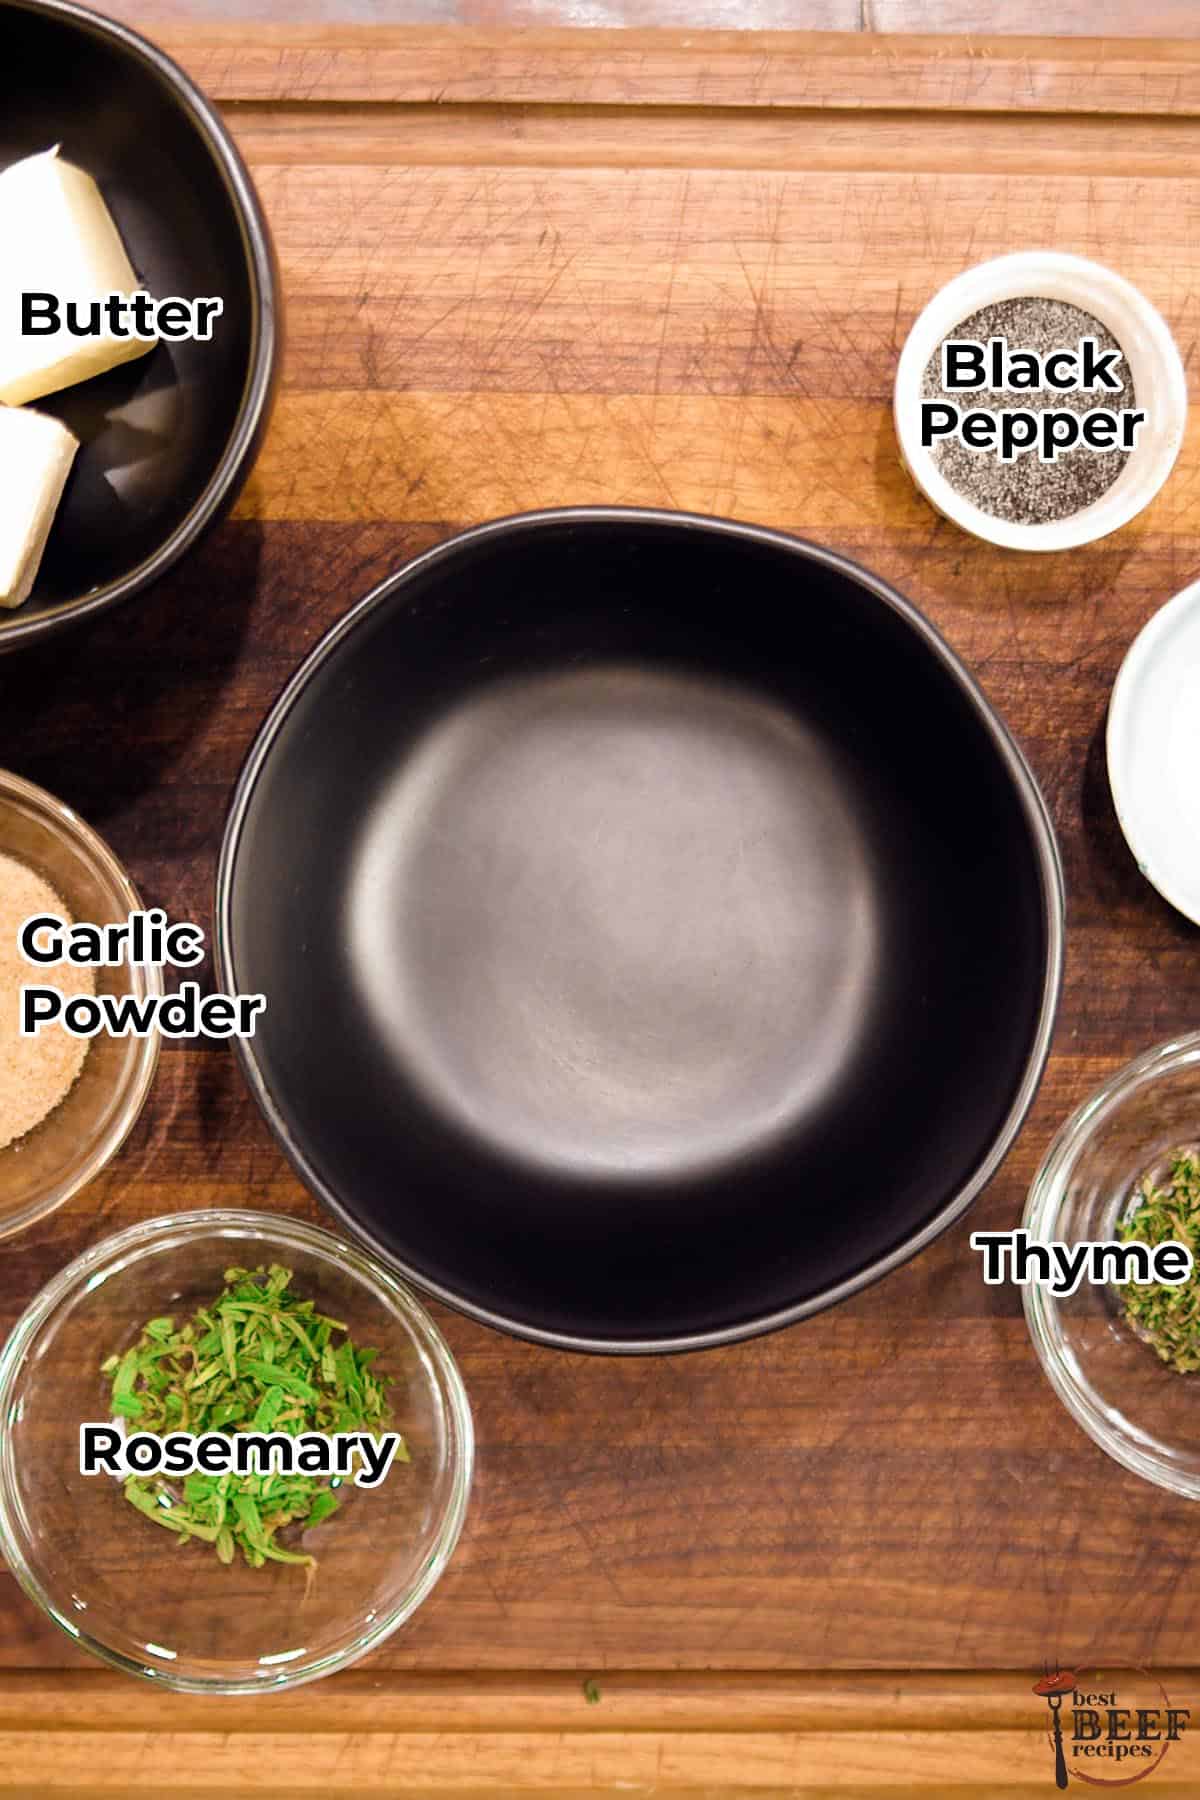 Butter rub ingredients in separate bowls with labels, next to an empty mixing bowl